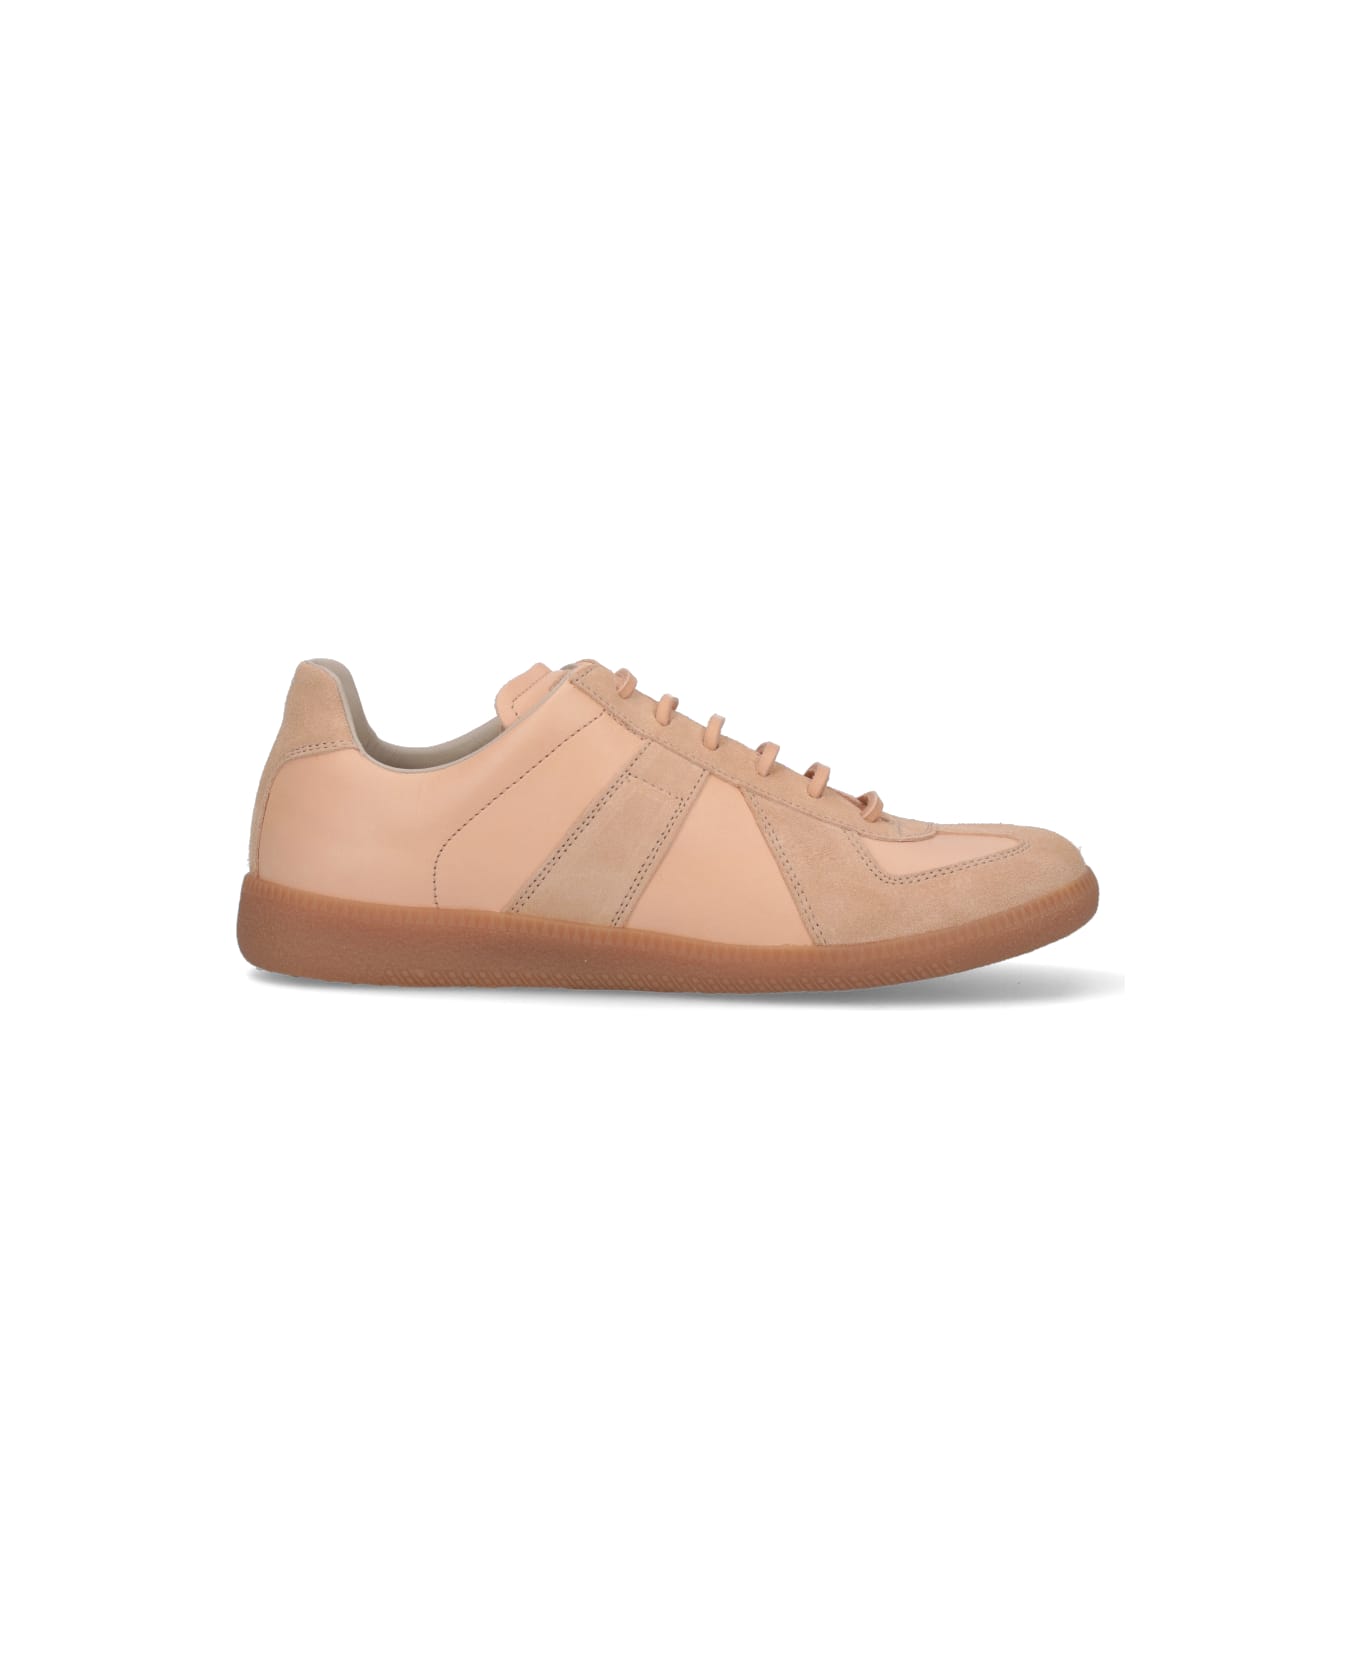 Maison Margiela Replica Suede Sneakers - Pink スニーカー